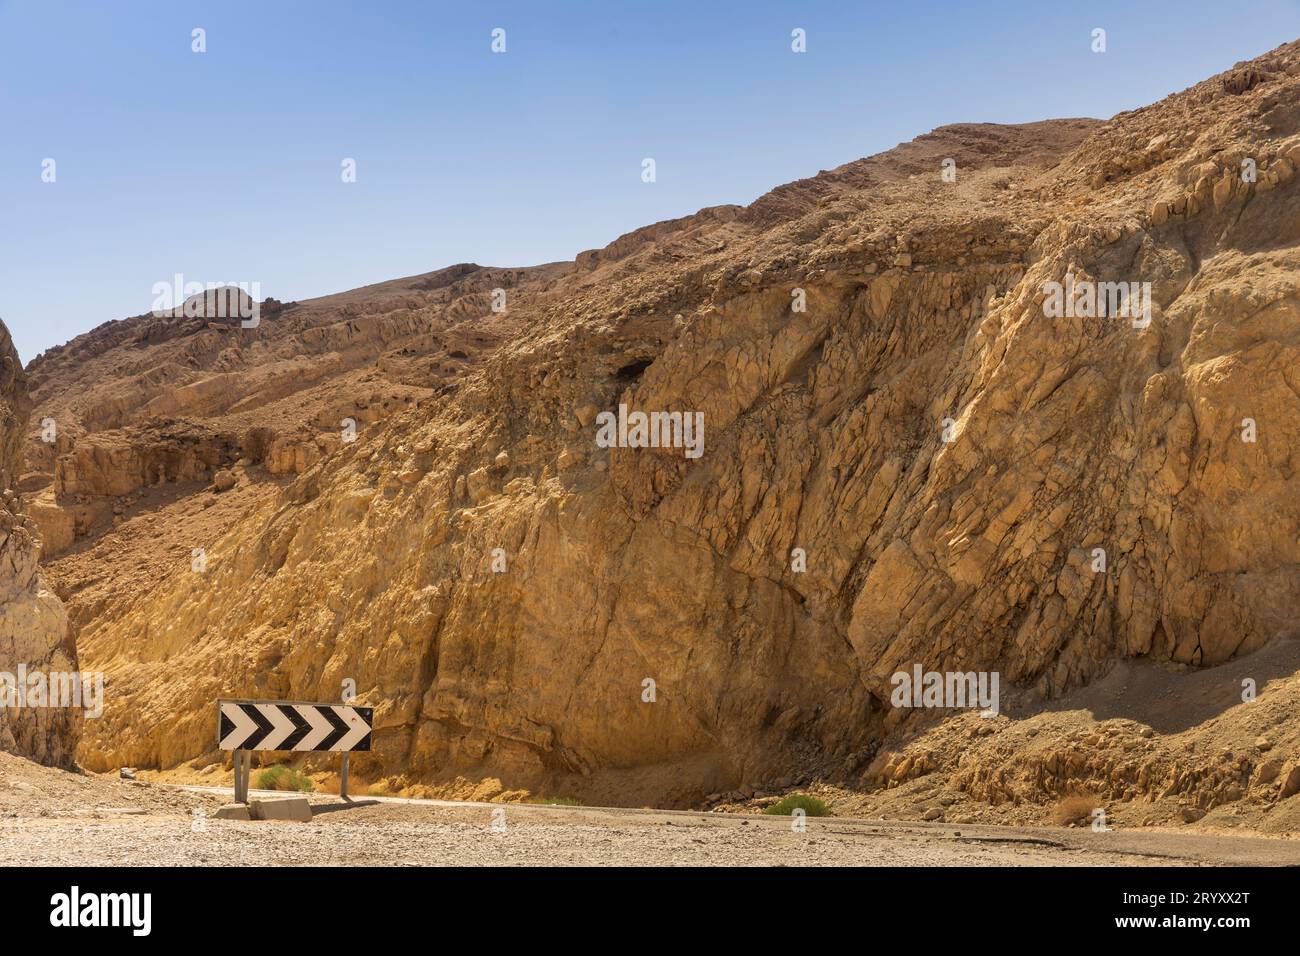 A highway with a rocky mountain on the side, power poles and sky in the background, desert Dead Sea, Israel Stock Photo